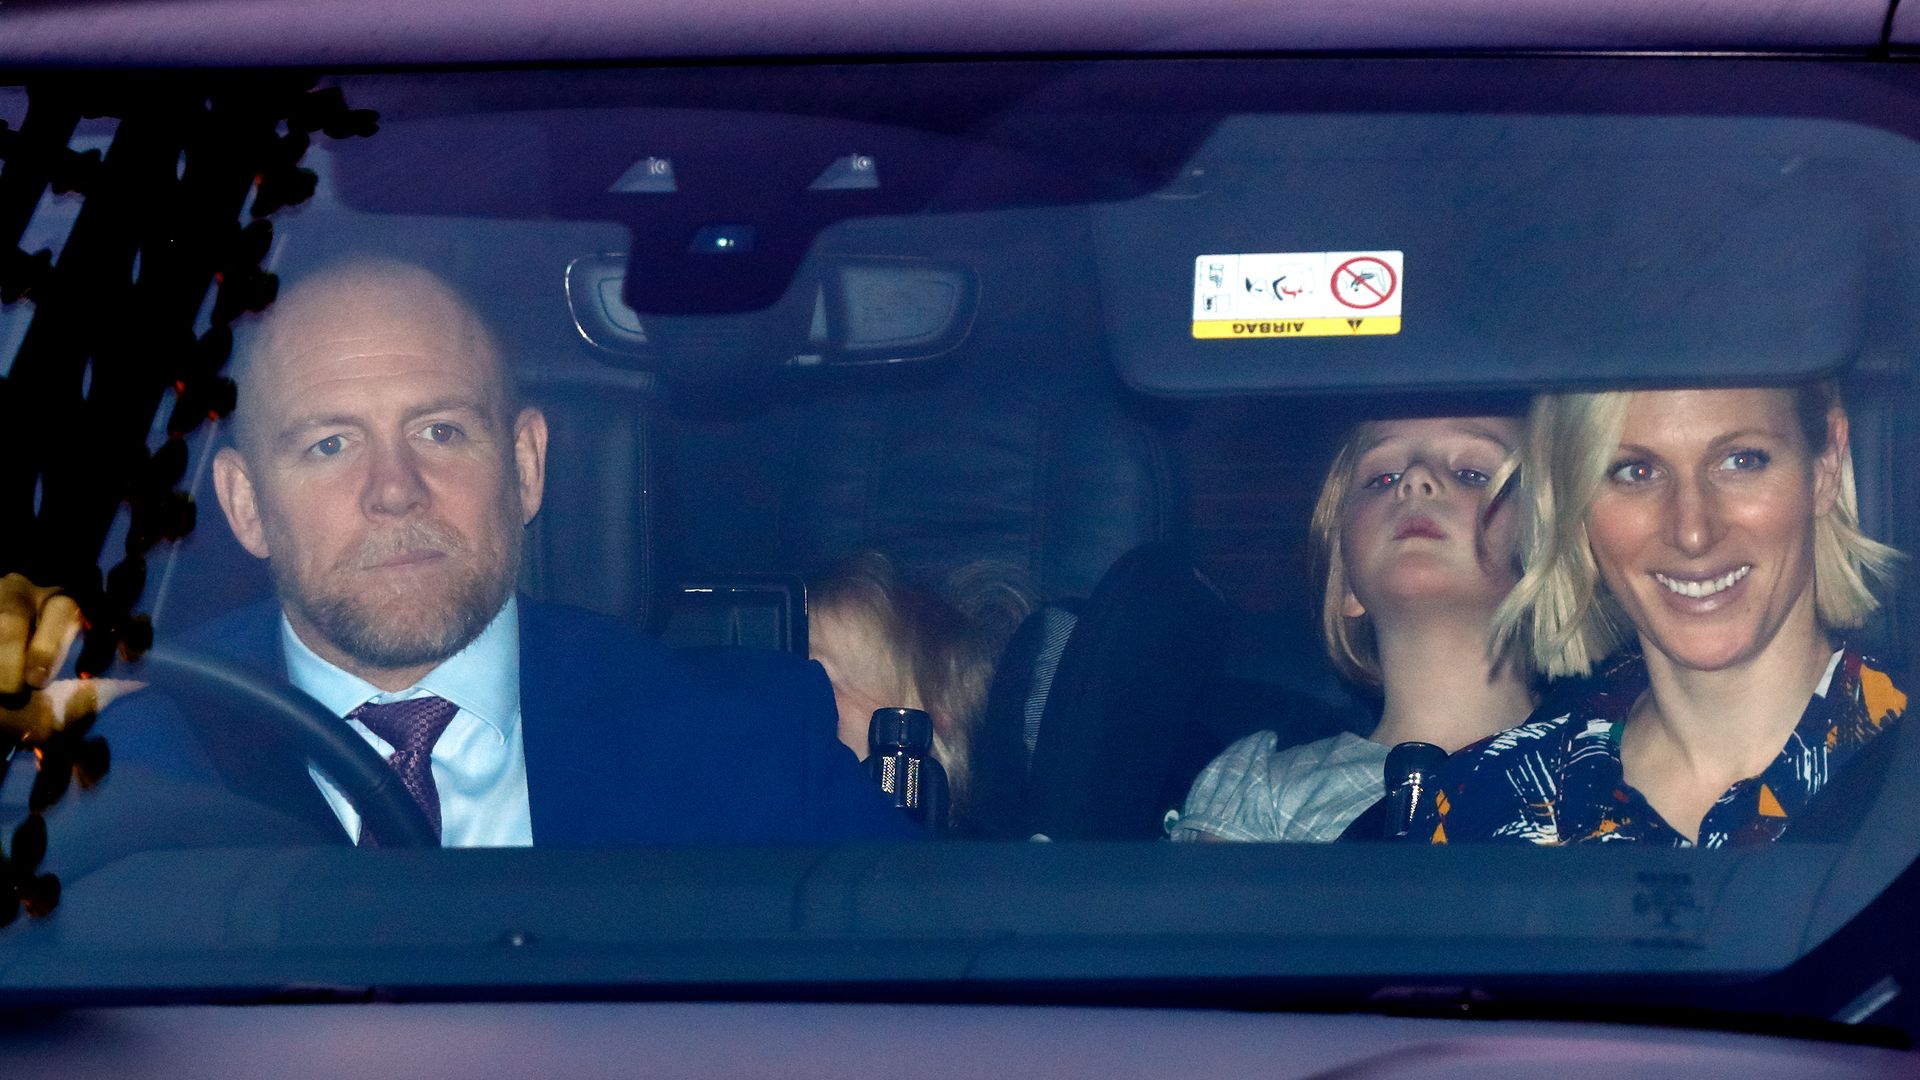 Mike Tindall driving with Zara Tindall, Mia Tindall and Lena Tindall in the car